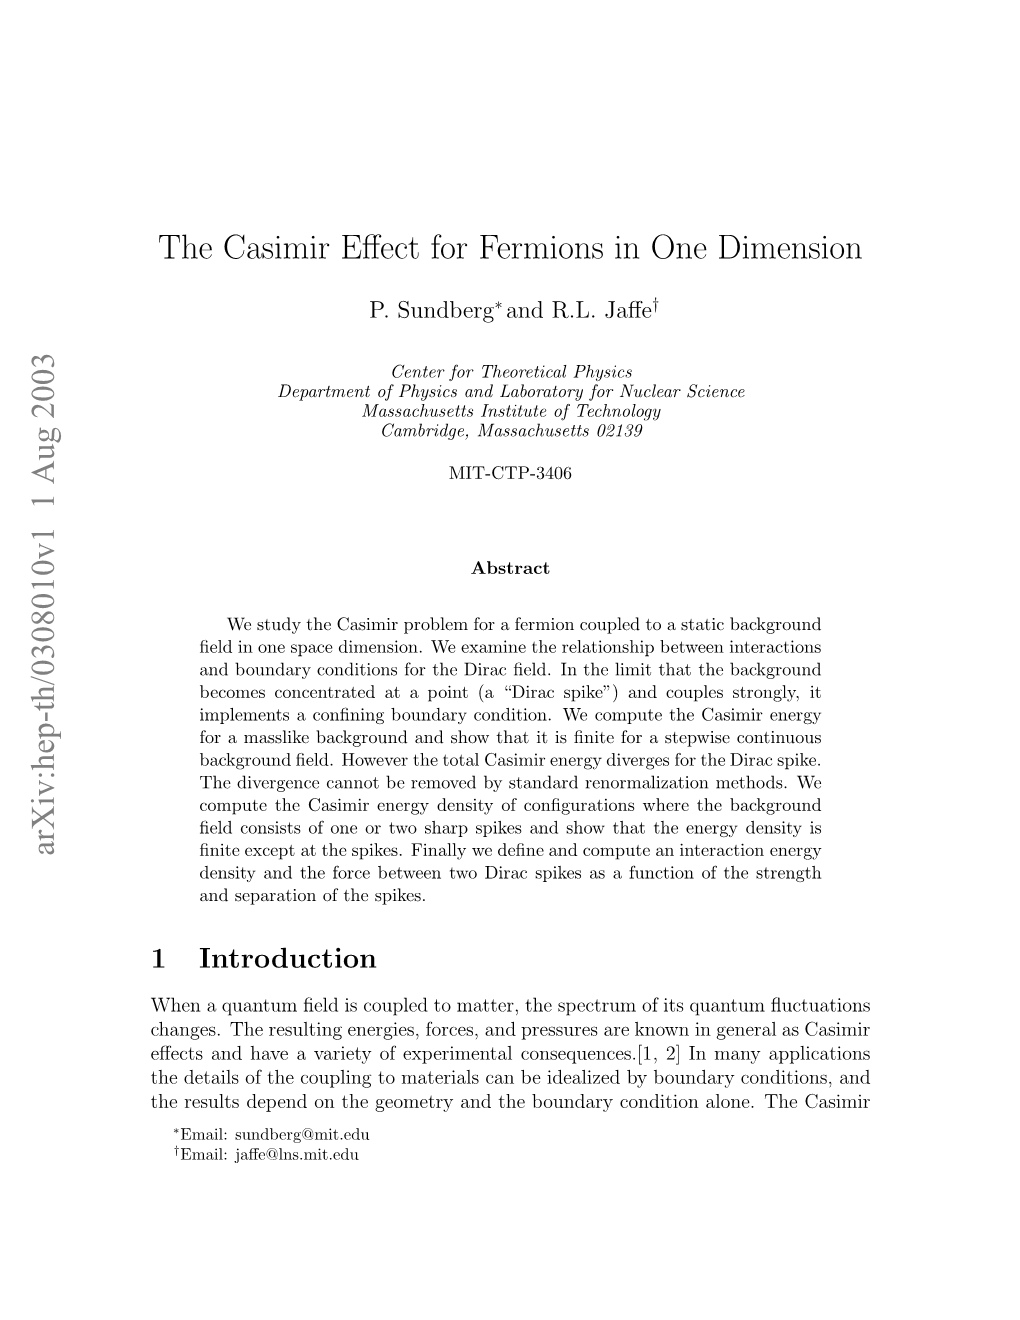 The Casimir Effect for Fermions in One Dimension